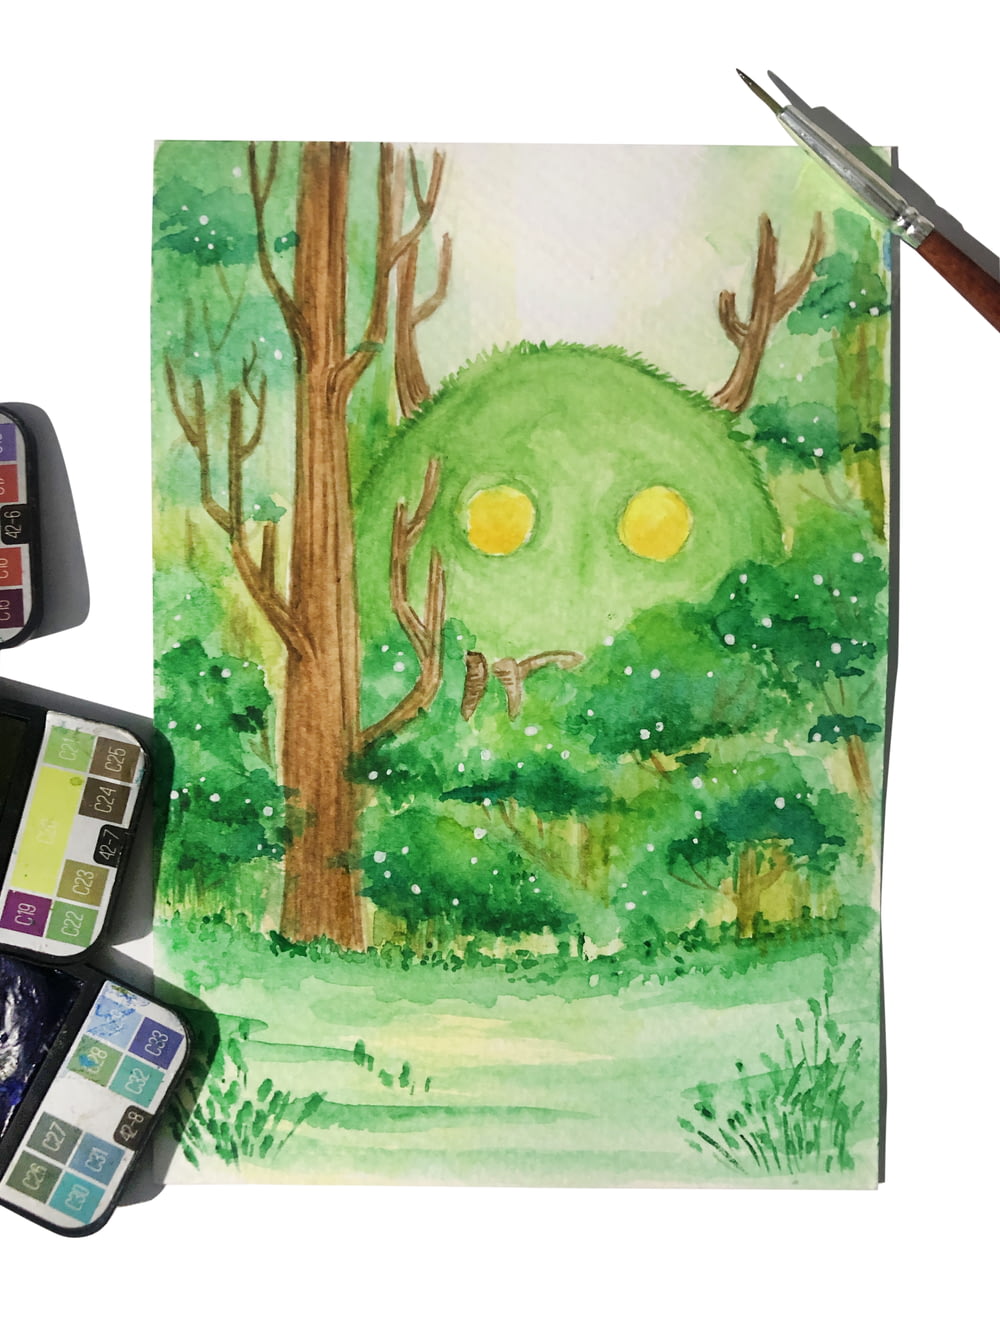 a watercolor painting of a green monster in a forest